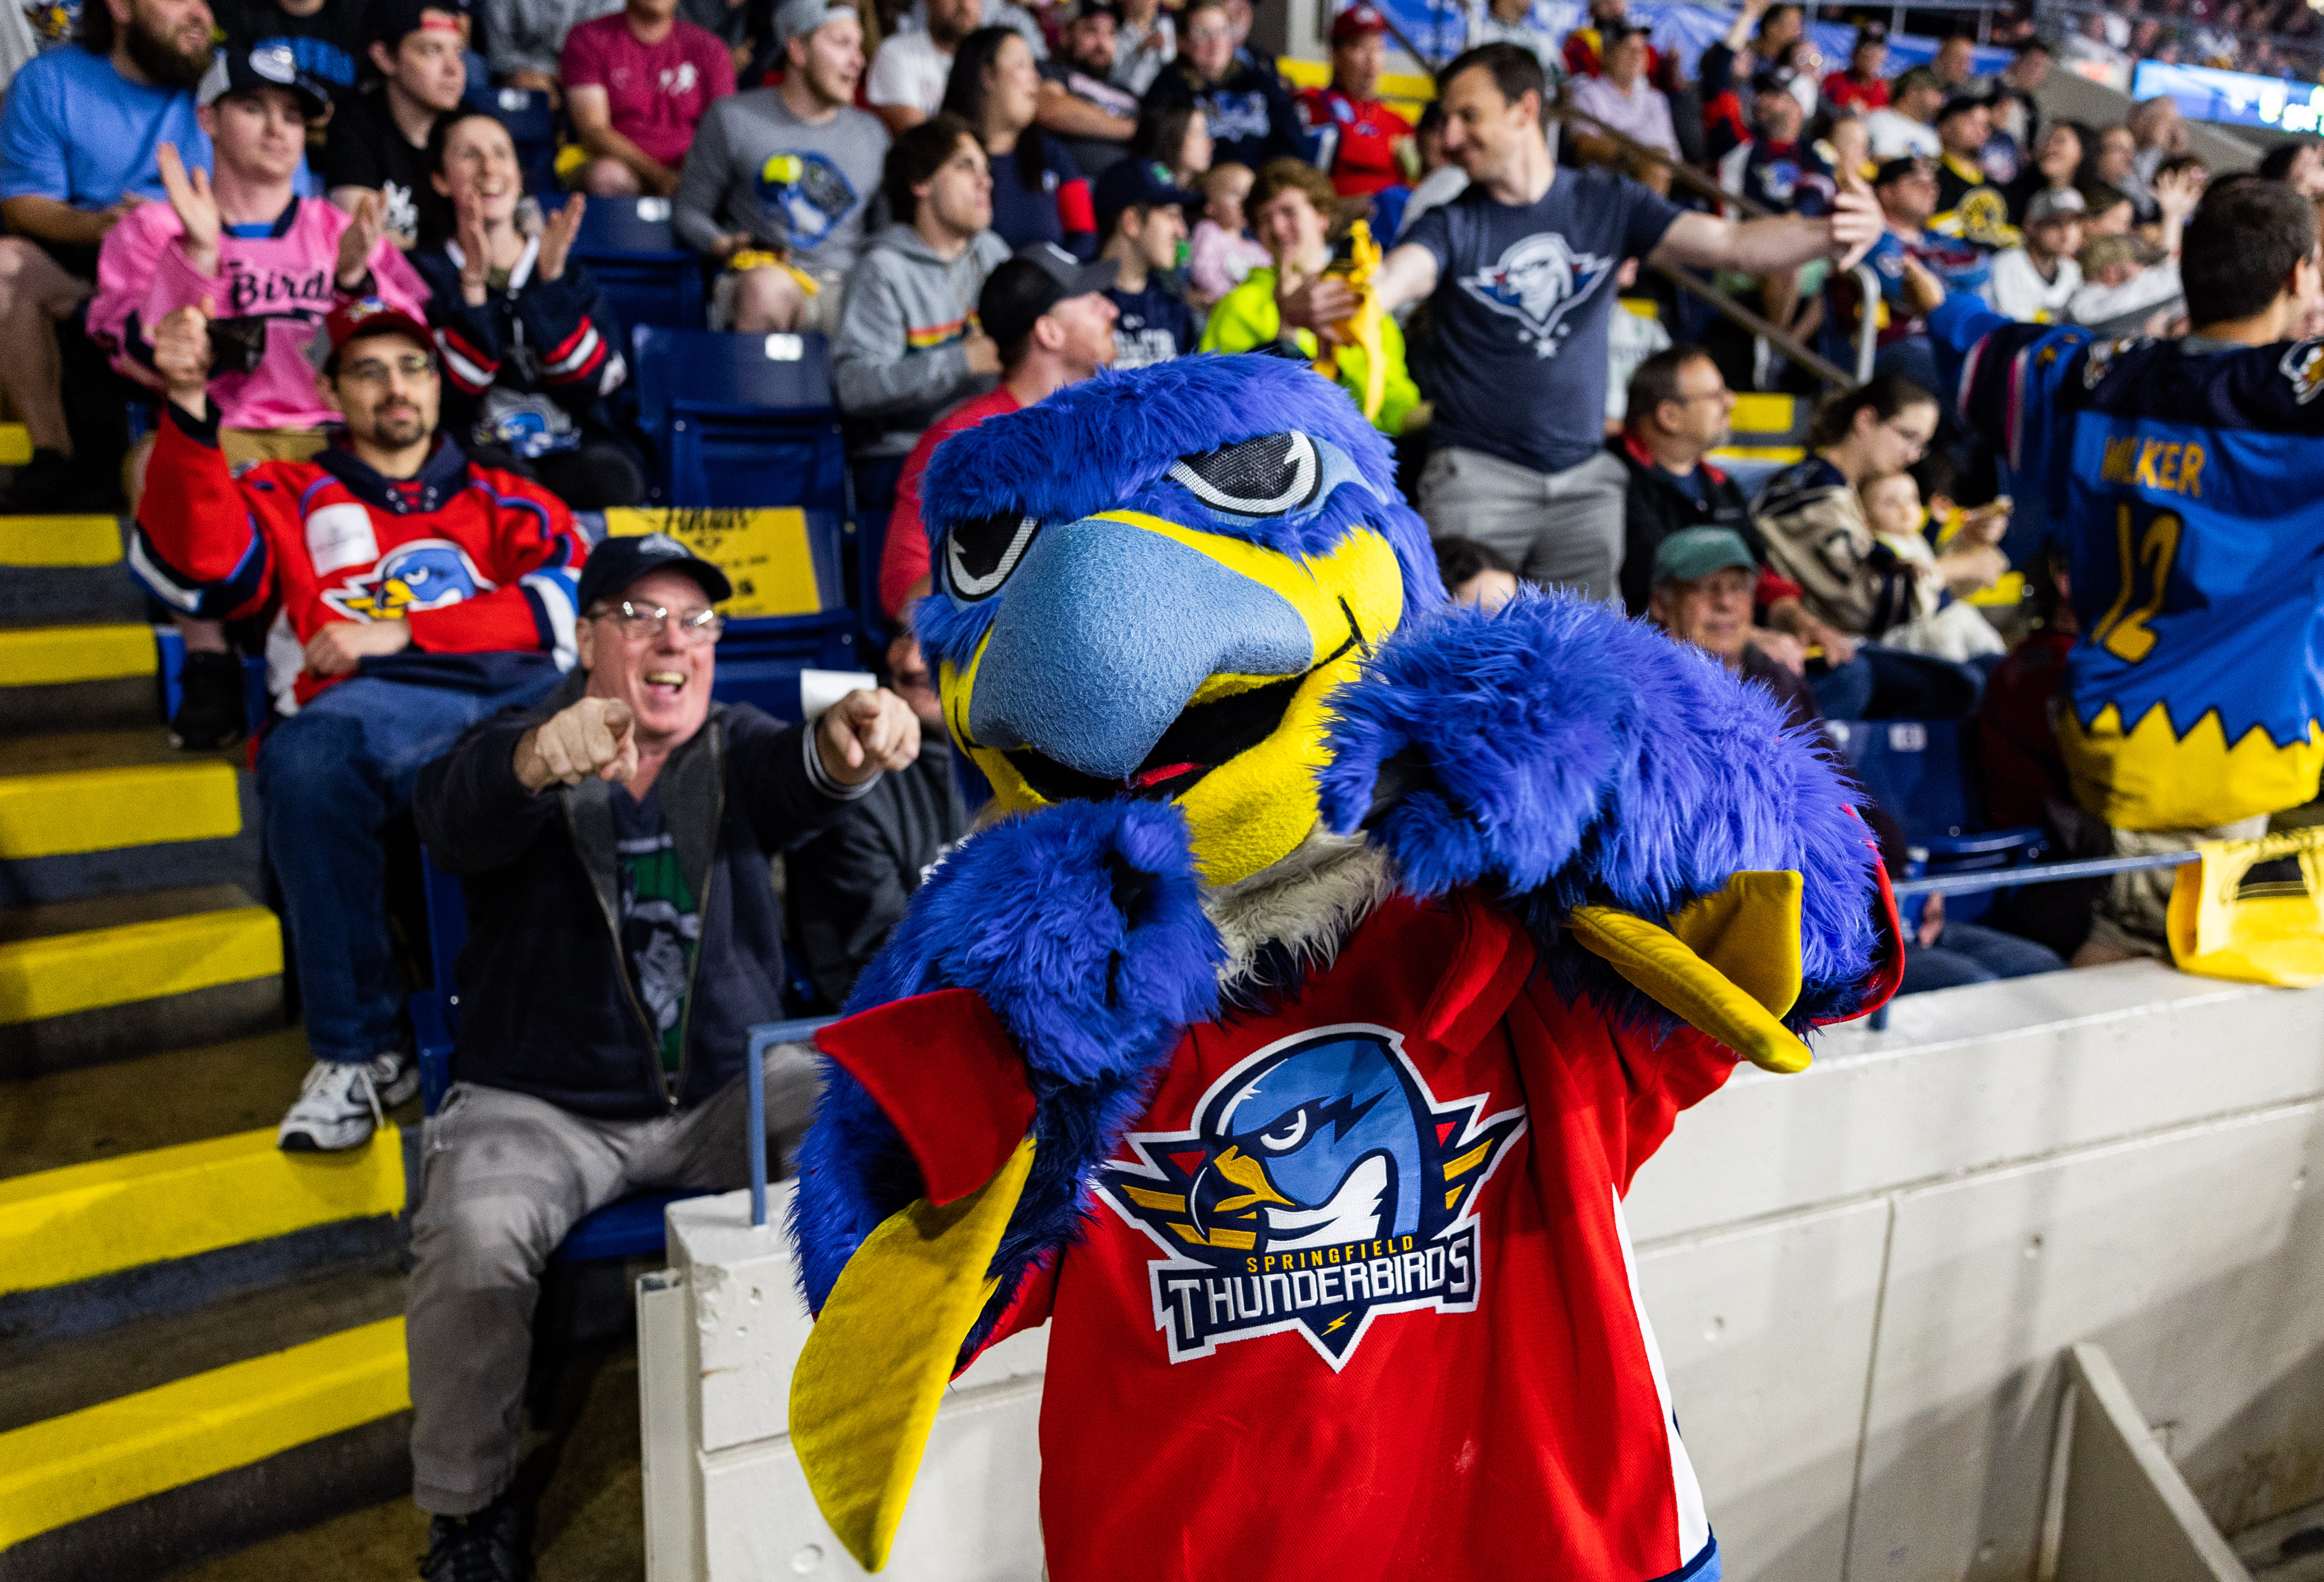 Introducing our specialty - Springfield Thunderbirds